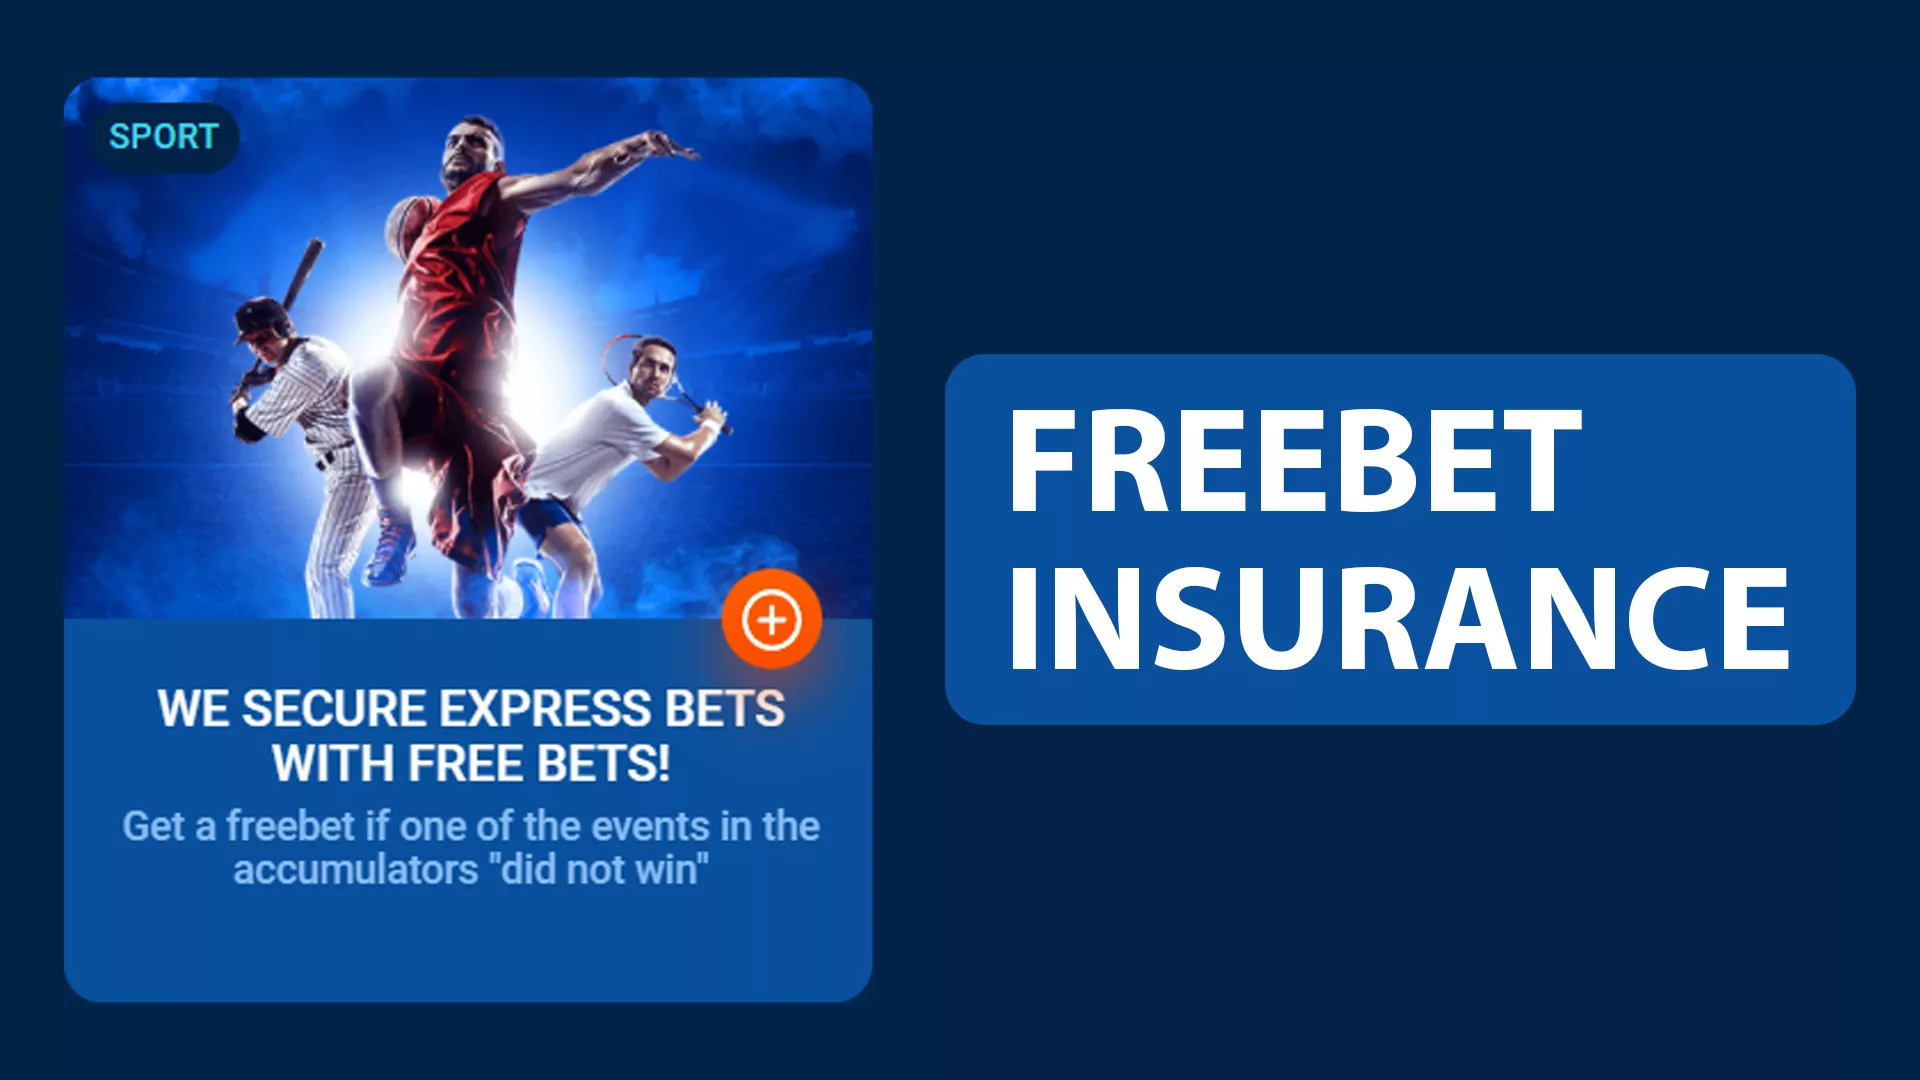 Get freebets for more betting.